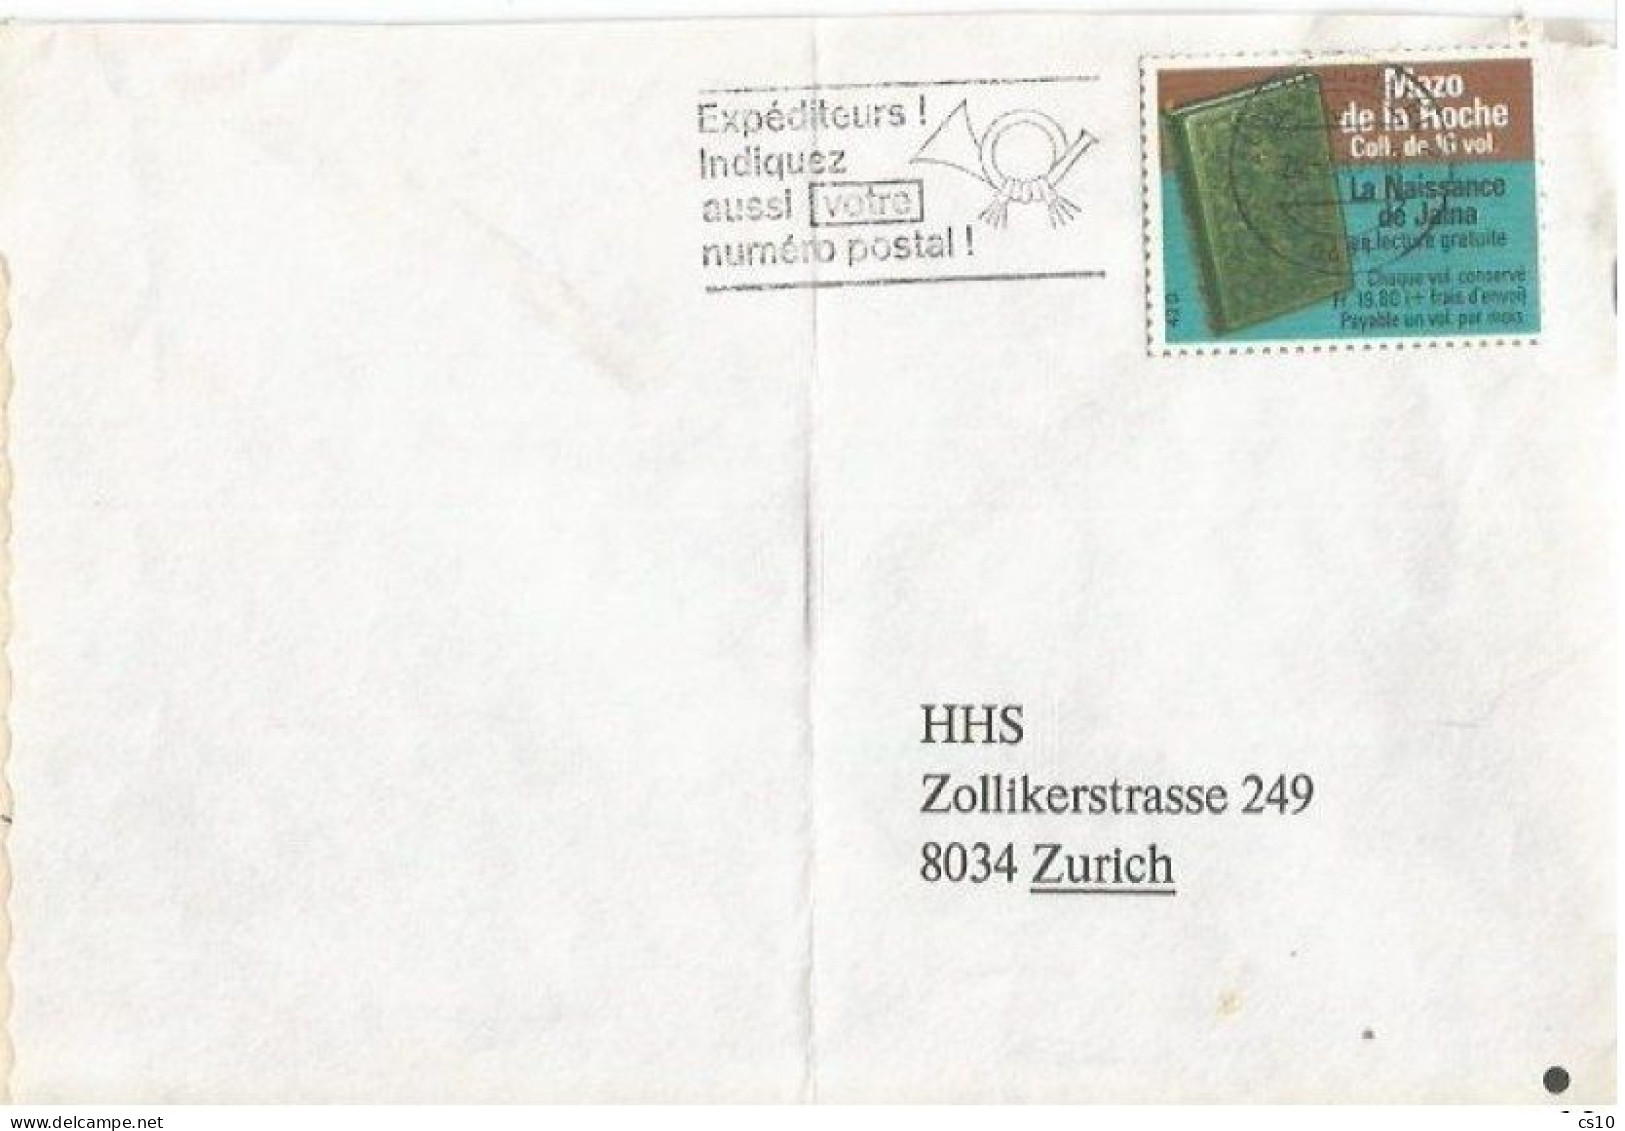 Suisse Neuchatel 24frb1980 POSTAL FRAUD With No Value Label On CV To Zurich - Franquicia